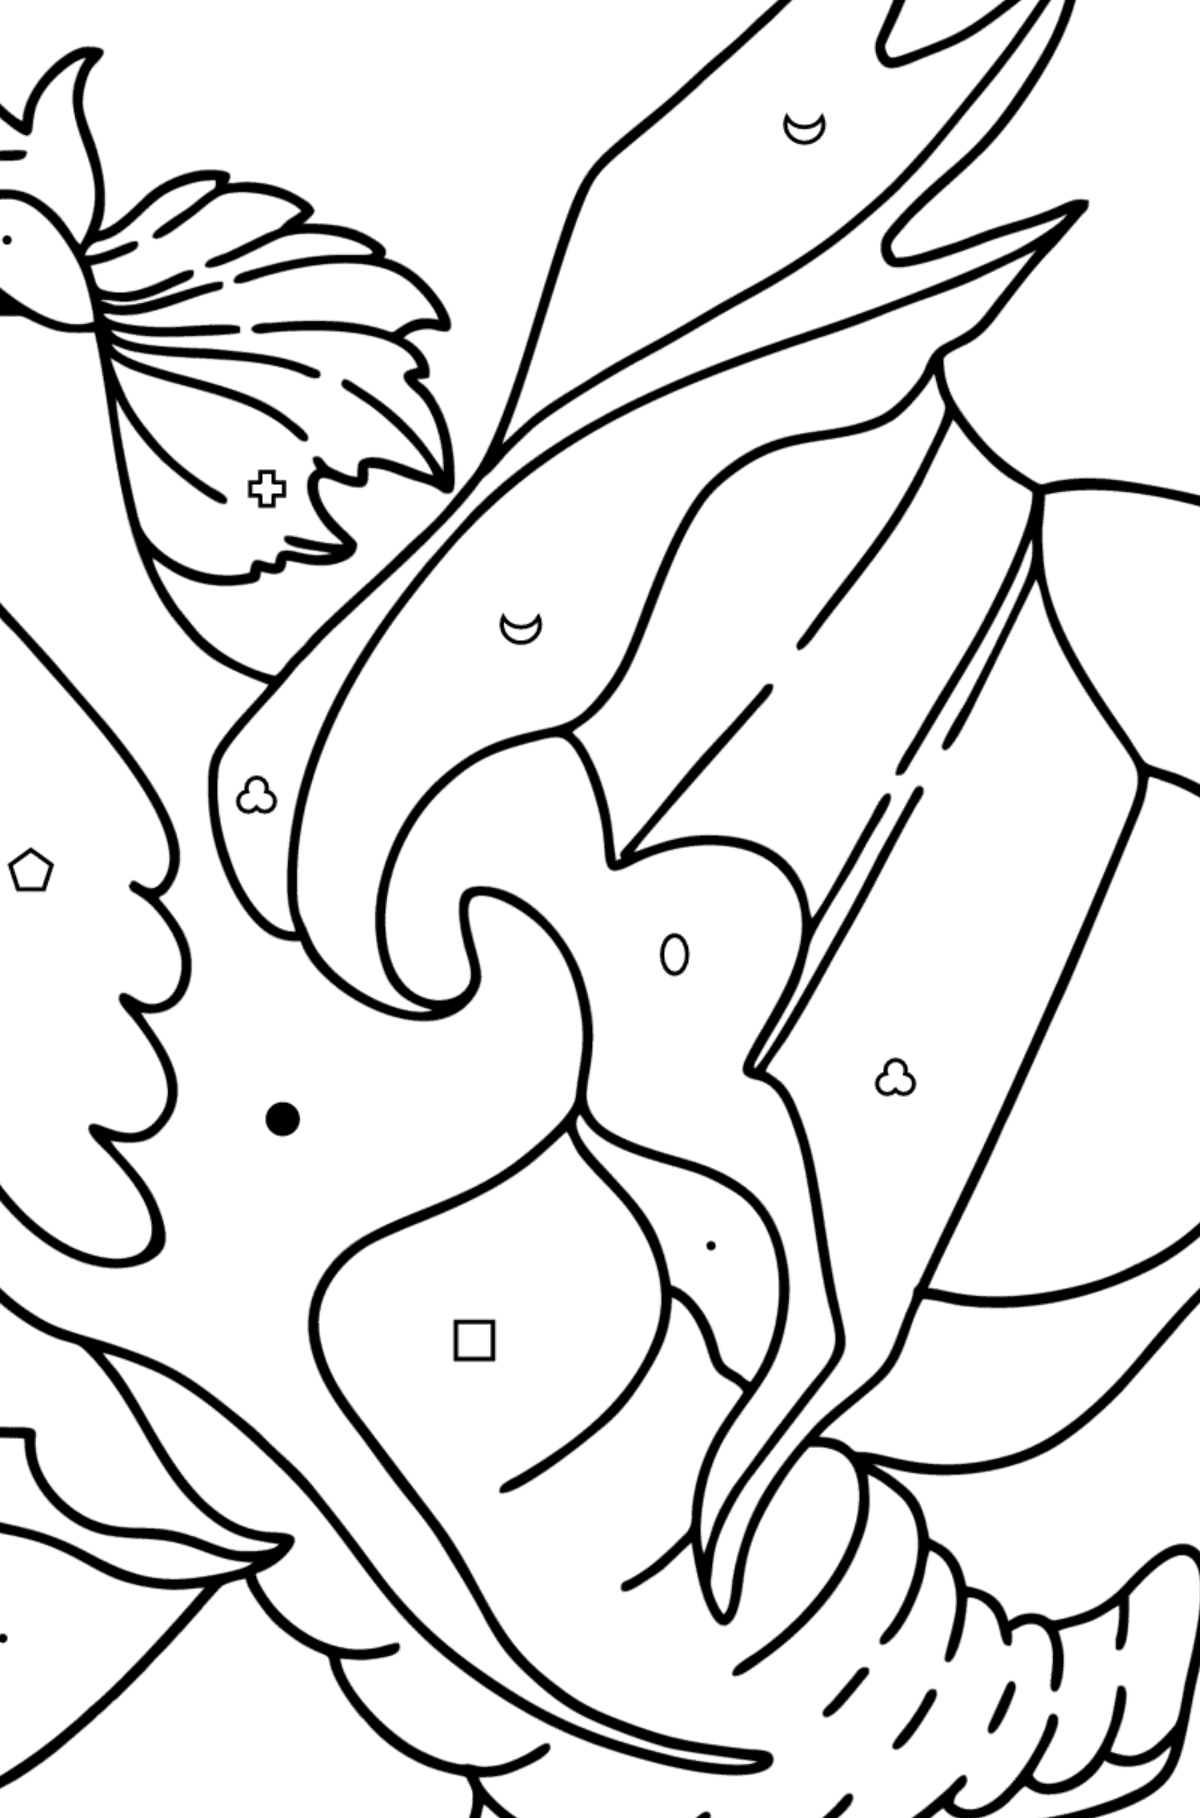 Lucky Dragon coloring page - Coloring by Symbols and Geometric Shapes for Kids